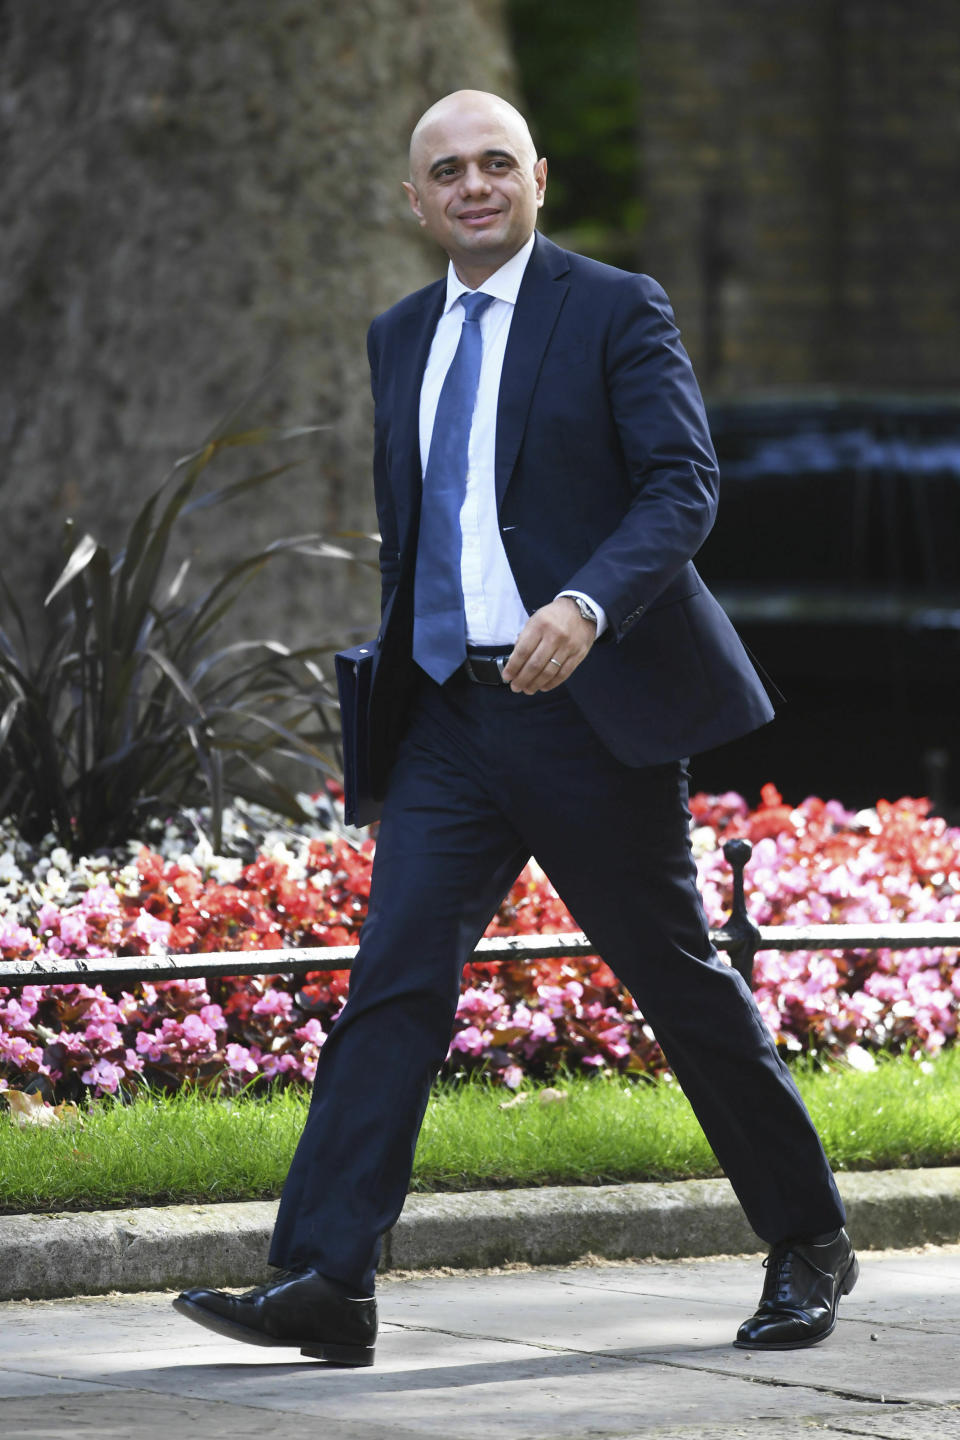 Britain's Home Secretary Sajid Javid arrives for a cabinet meeting at 10 Downing Street, London, Tuesday June 18, 2019. (Stefan Rousseau/PA via AP)